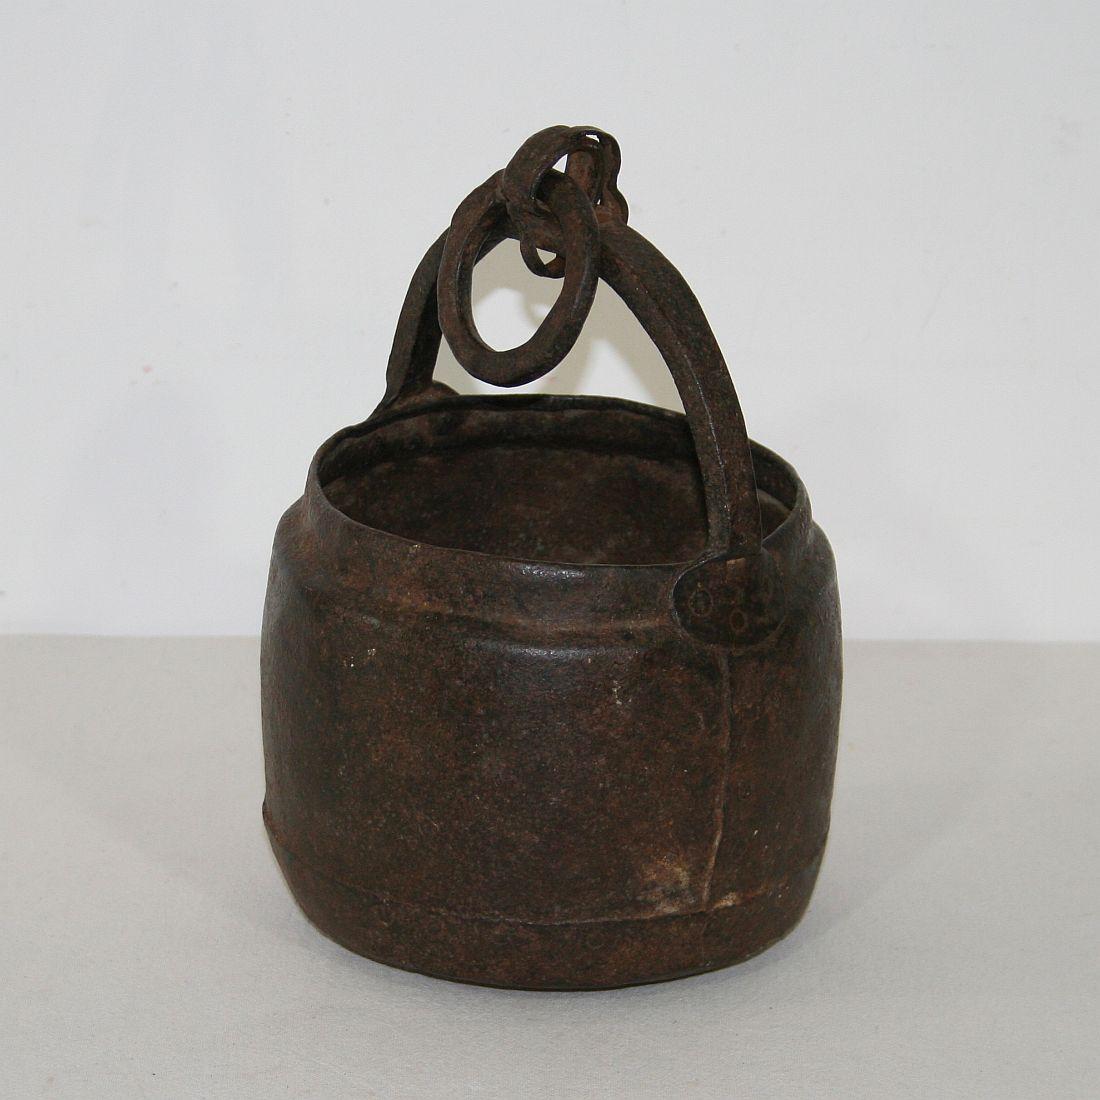 Rare and primitive hand forged iron cooking pot, India, 18th century. Weathered, small losses and old repairs.